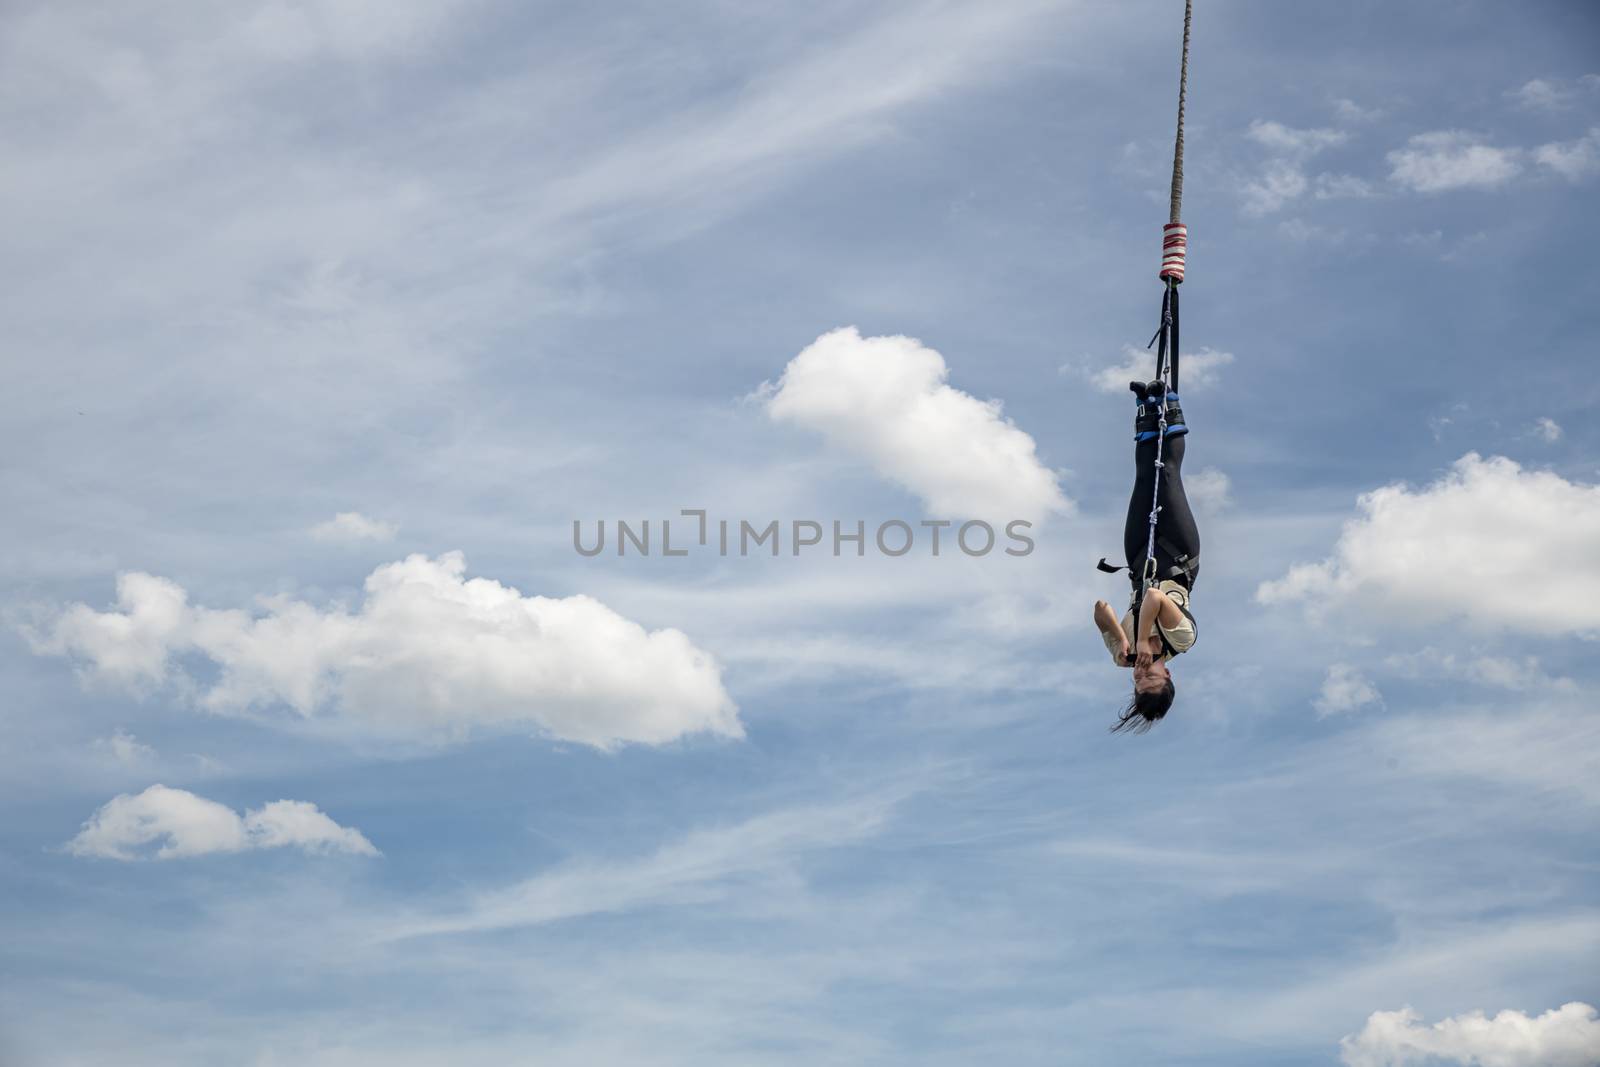 SCHEVENINGEN, 2 June 2019 - Bungee jumper jump from a platform hanging on the crane into the water against a pur blue spring sky of The Hague, Netherlands by ankorlight